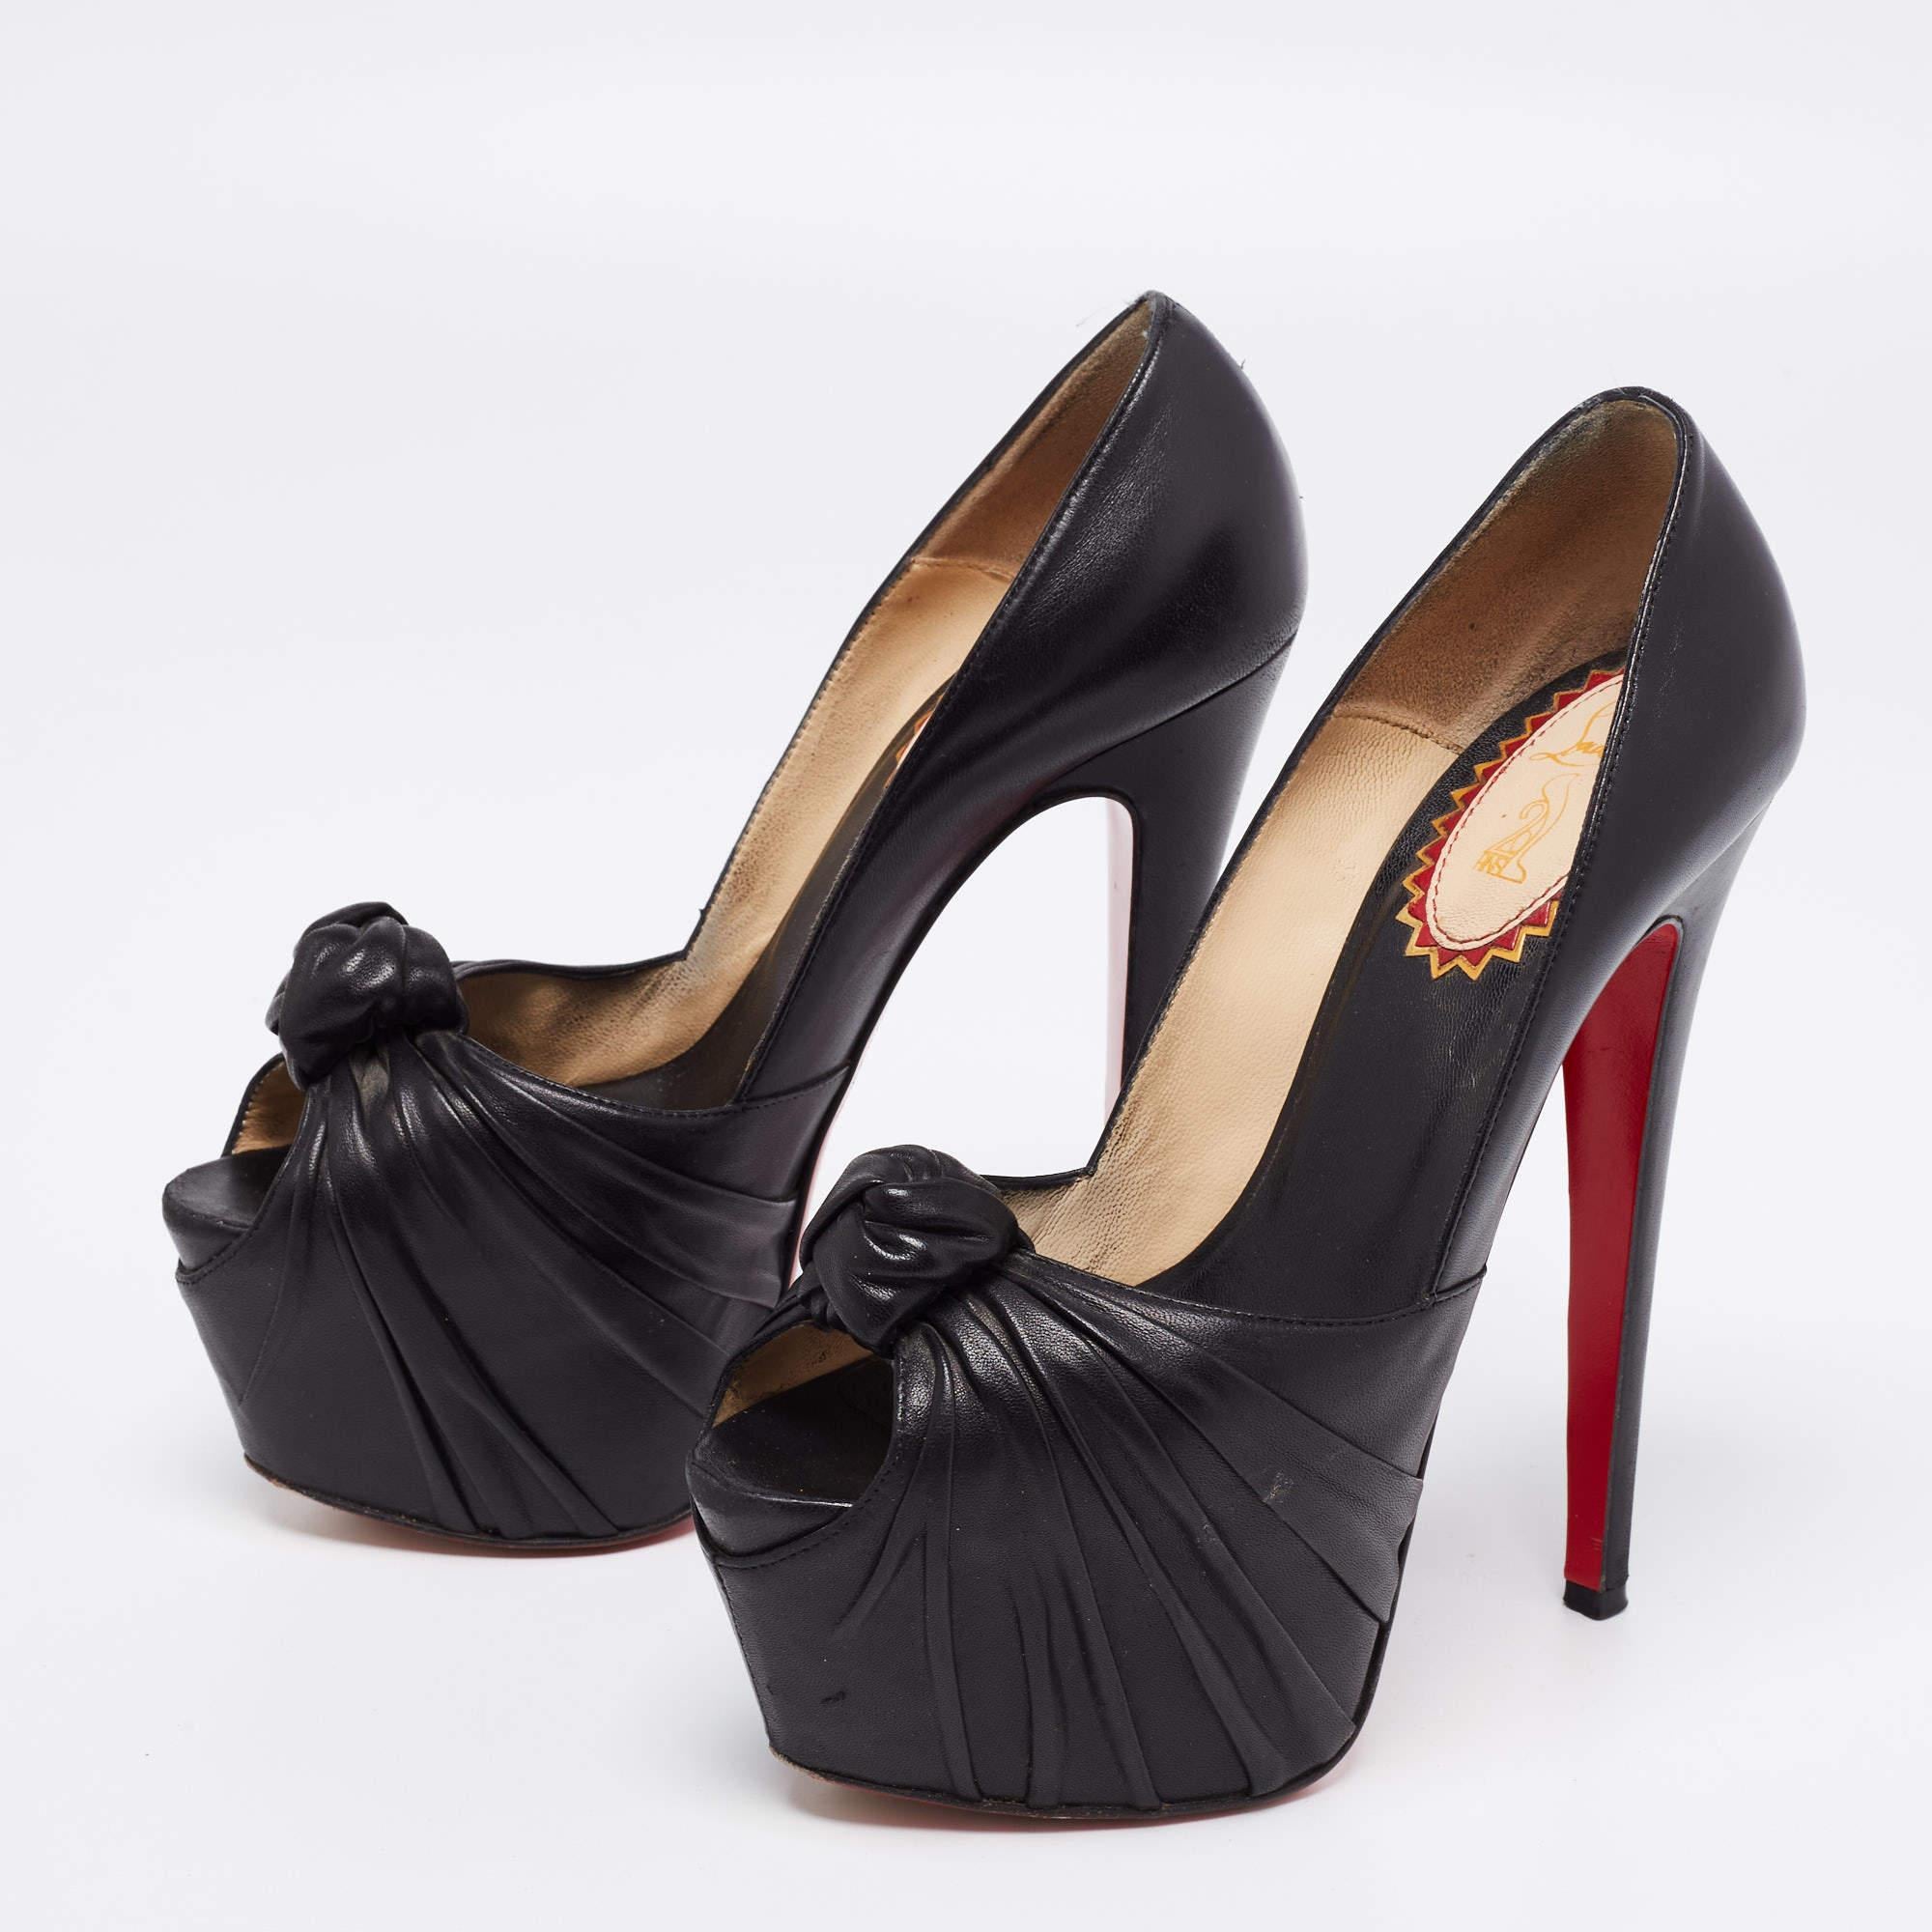 Set on towering heels and crafted with skilled perfection, these Lady Gres pumps from Christian Louboutin are here to elevate your style and take it a few notches higher! They are created using black leather and feature peep-toes, thick platforms,